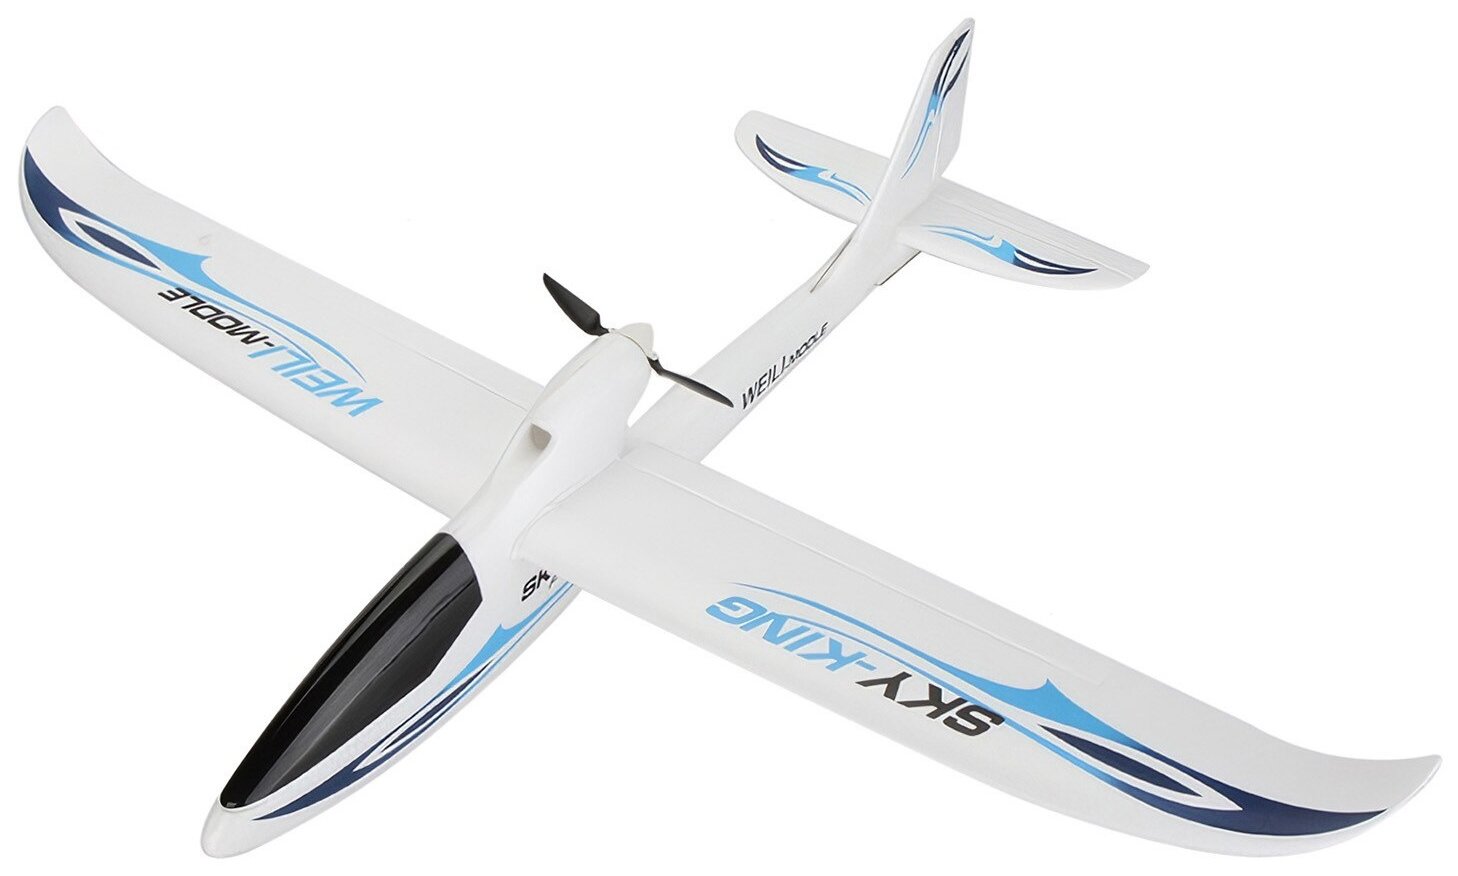   WL Toys F959S Sky King 6-AXIS GYRO 2.4G - F959S-BLUE